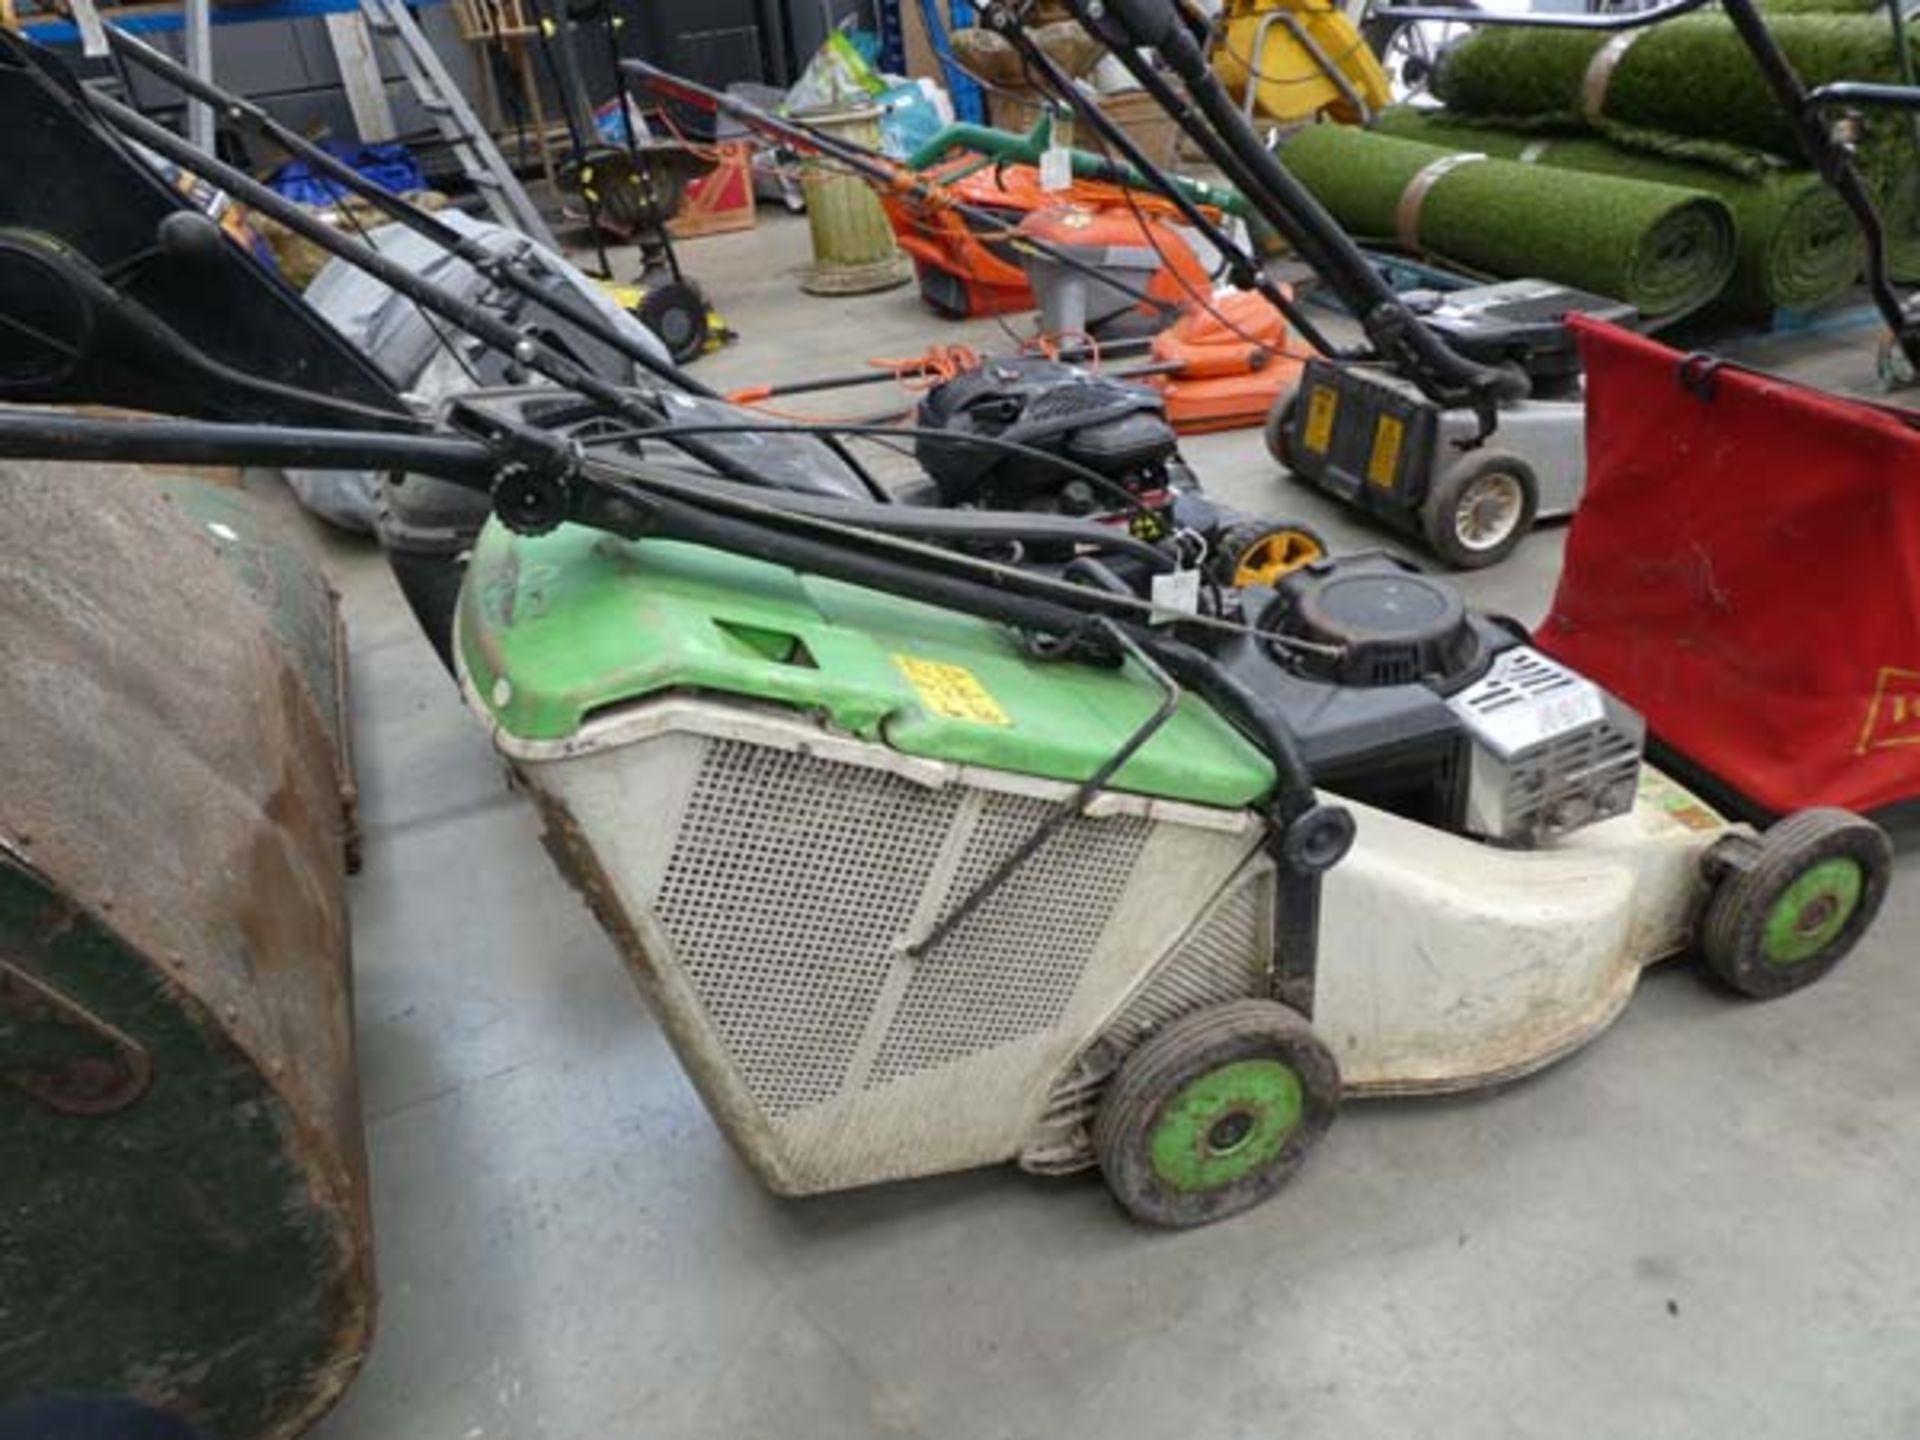 Etesia petrol powered mower with grass box Heavily used, some damage to handle. Model F-67160